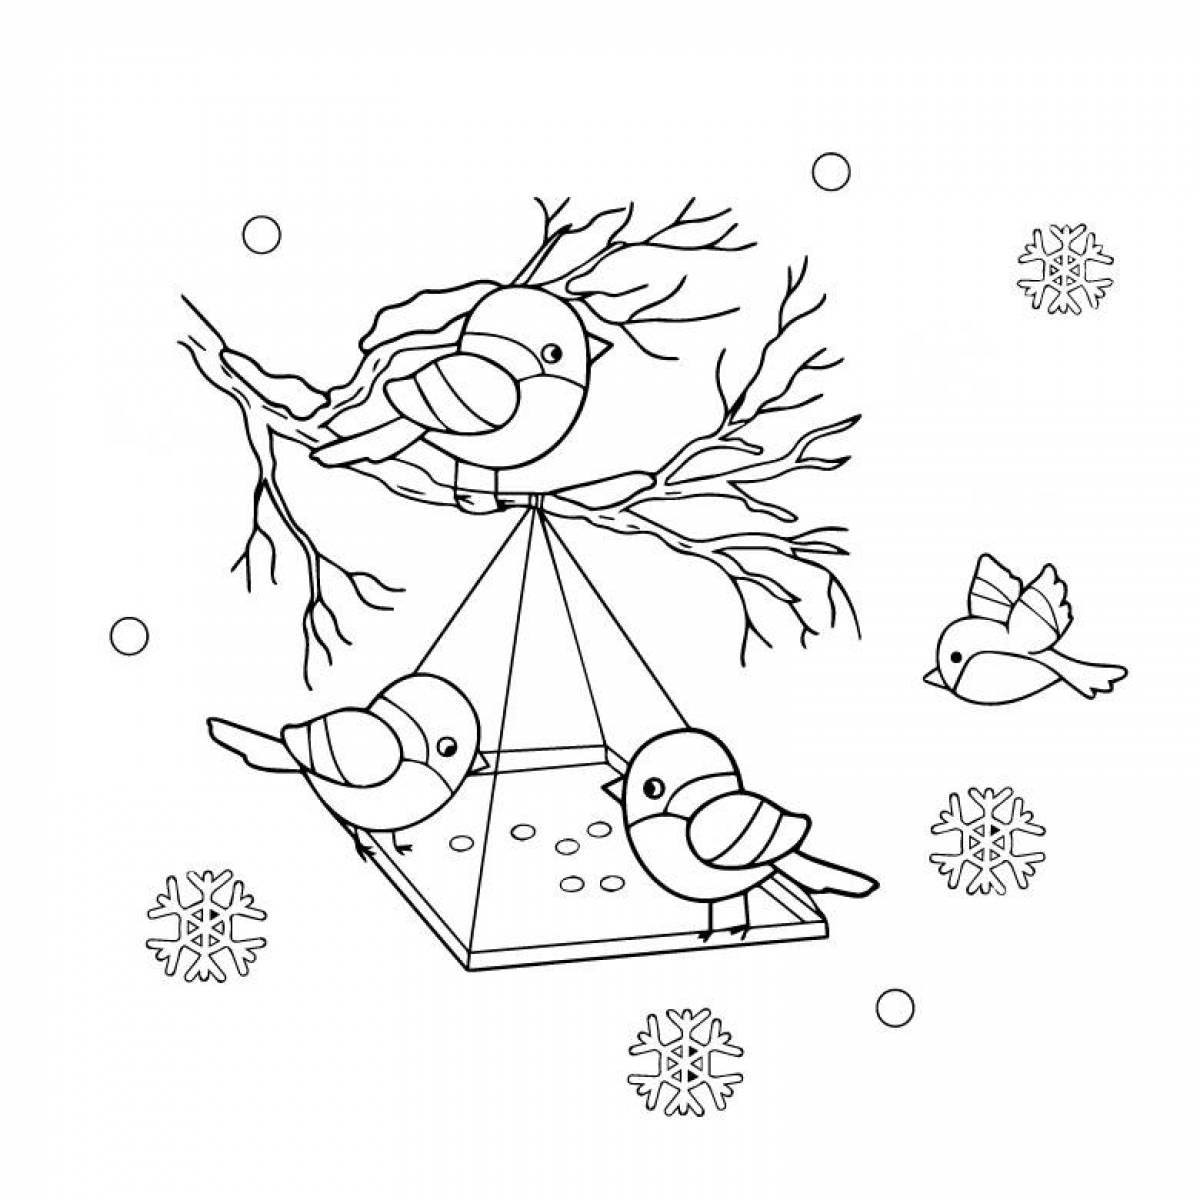 Tempting feeder coloring page